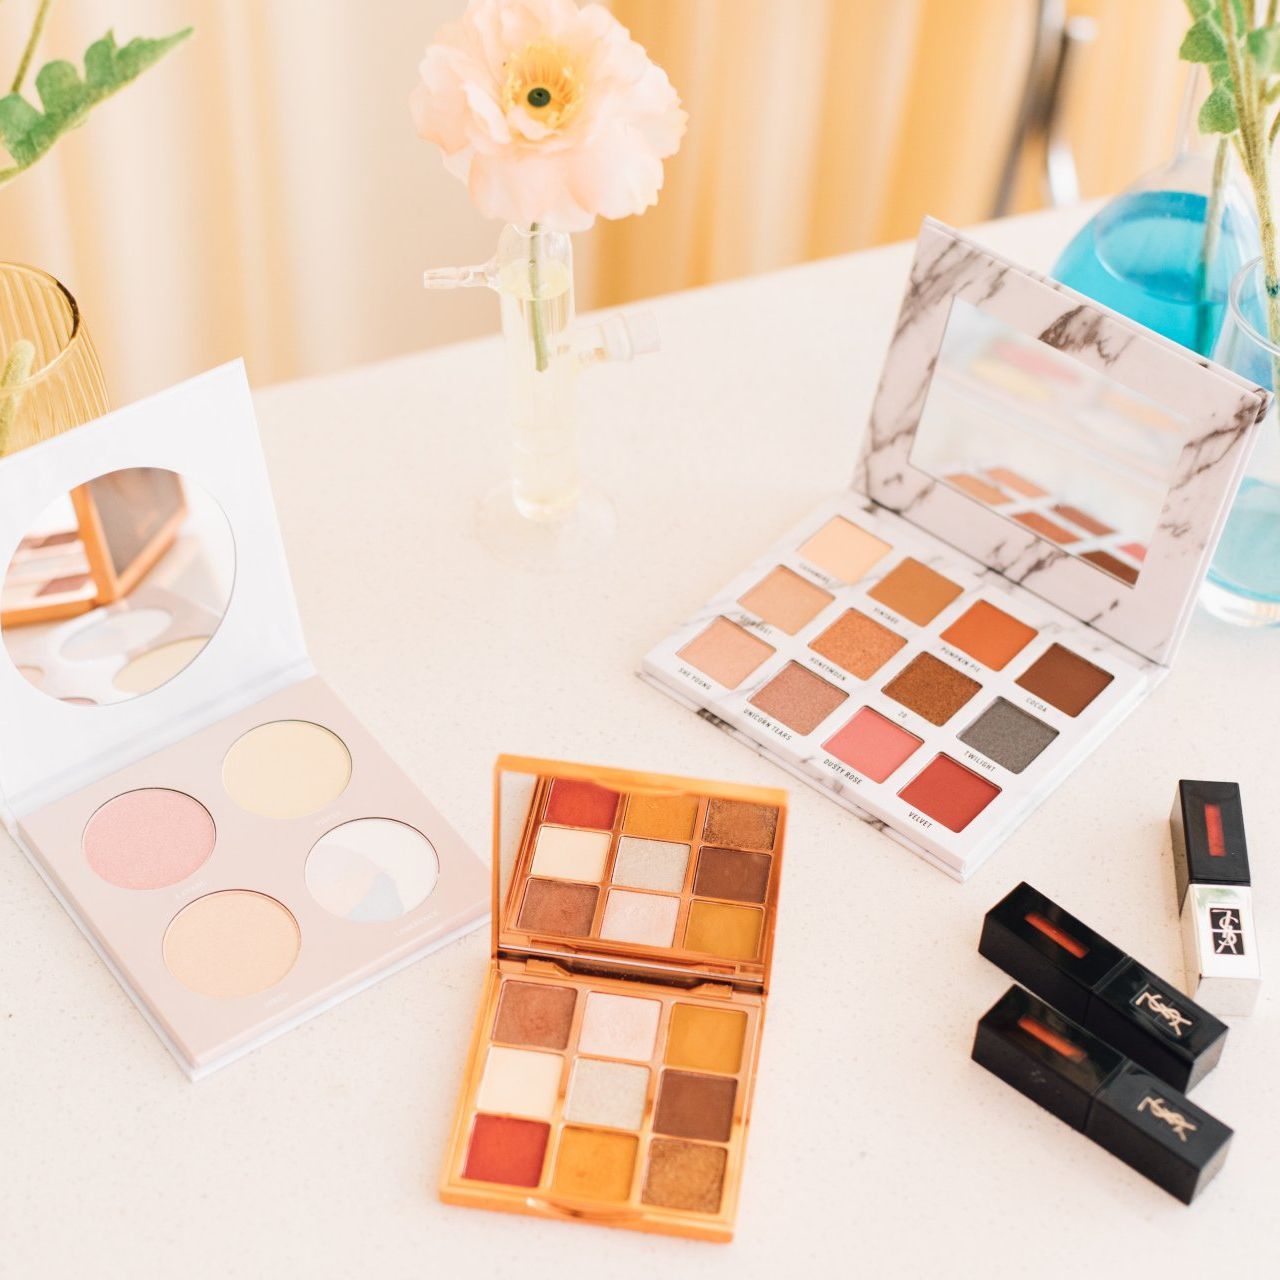 Several makeup palettes are on a table with a vase of flowers in the background